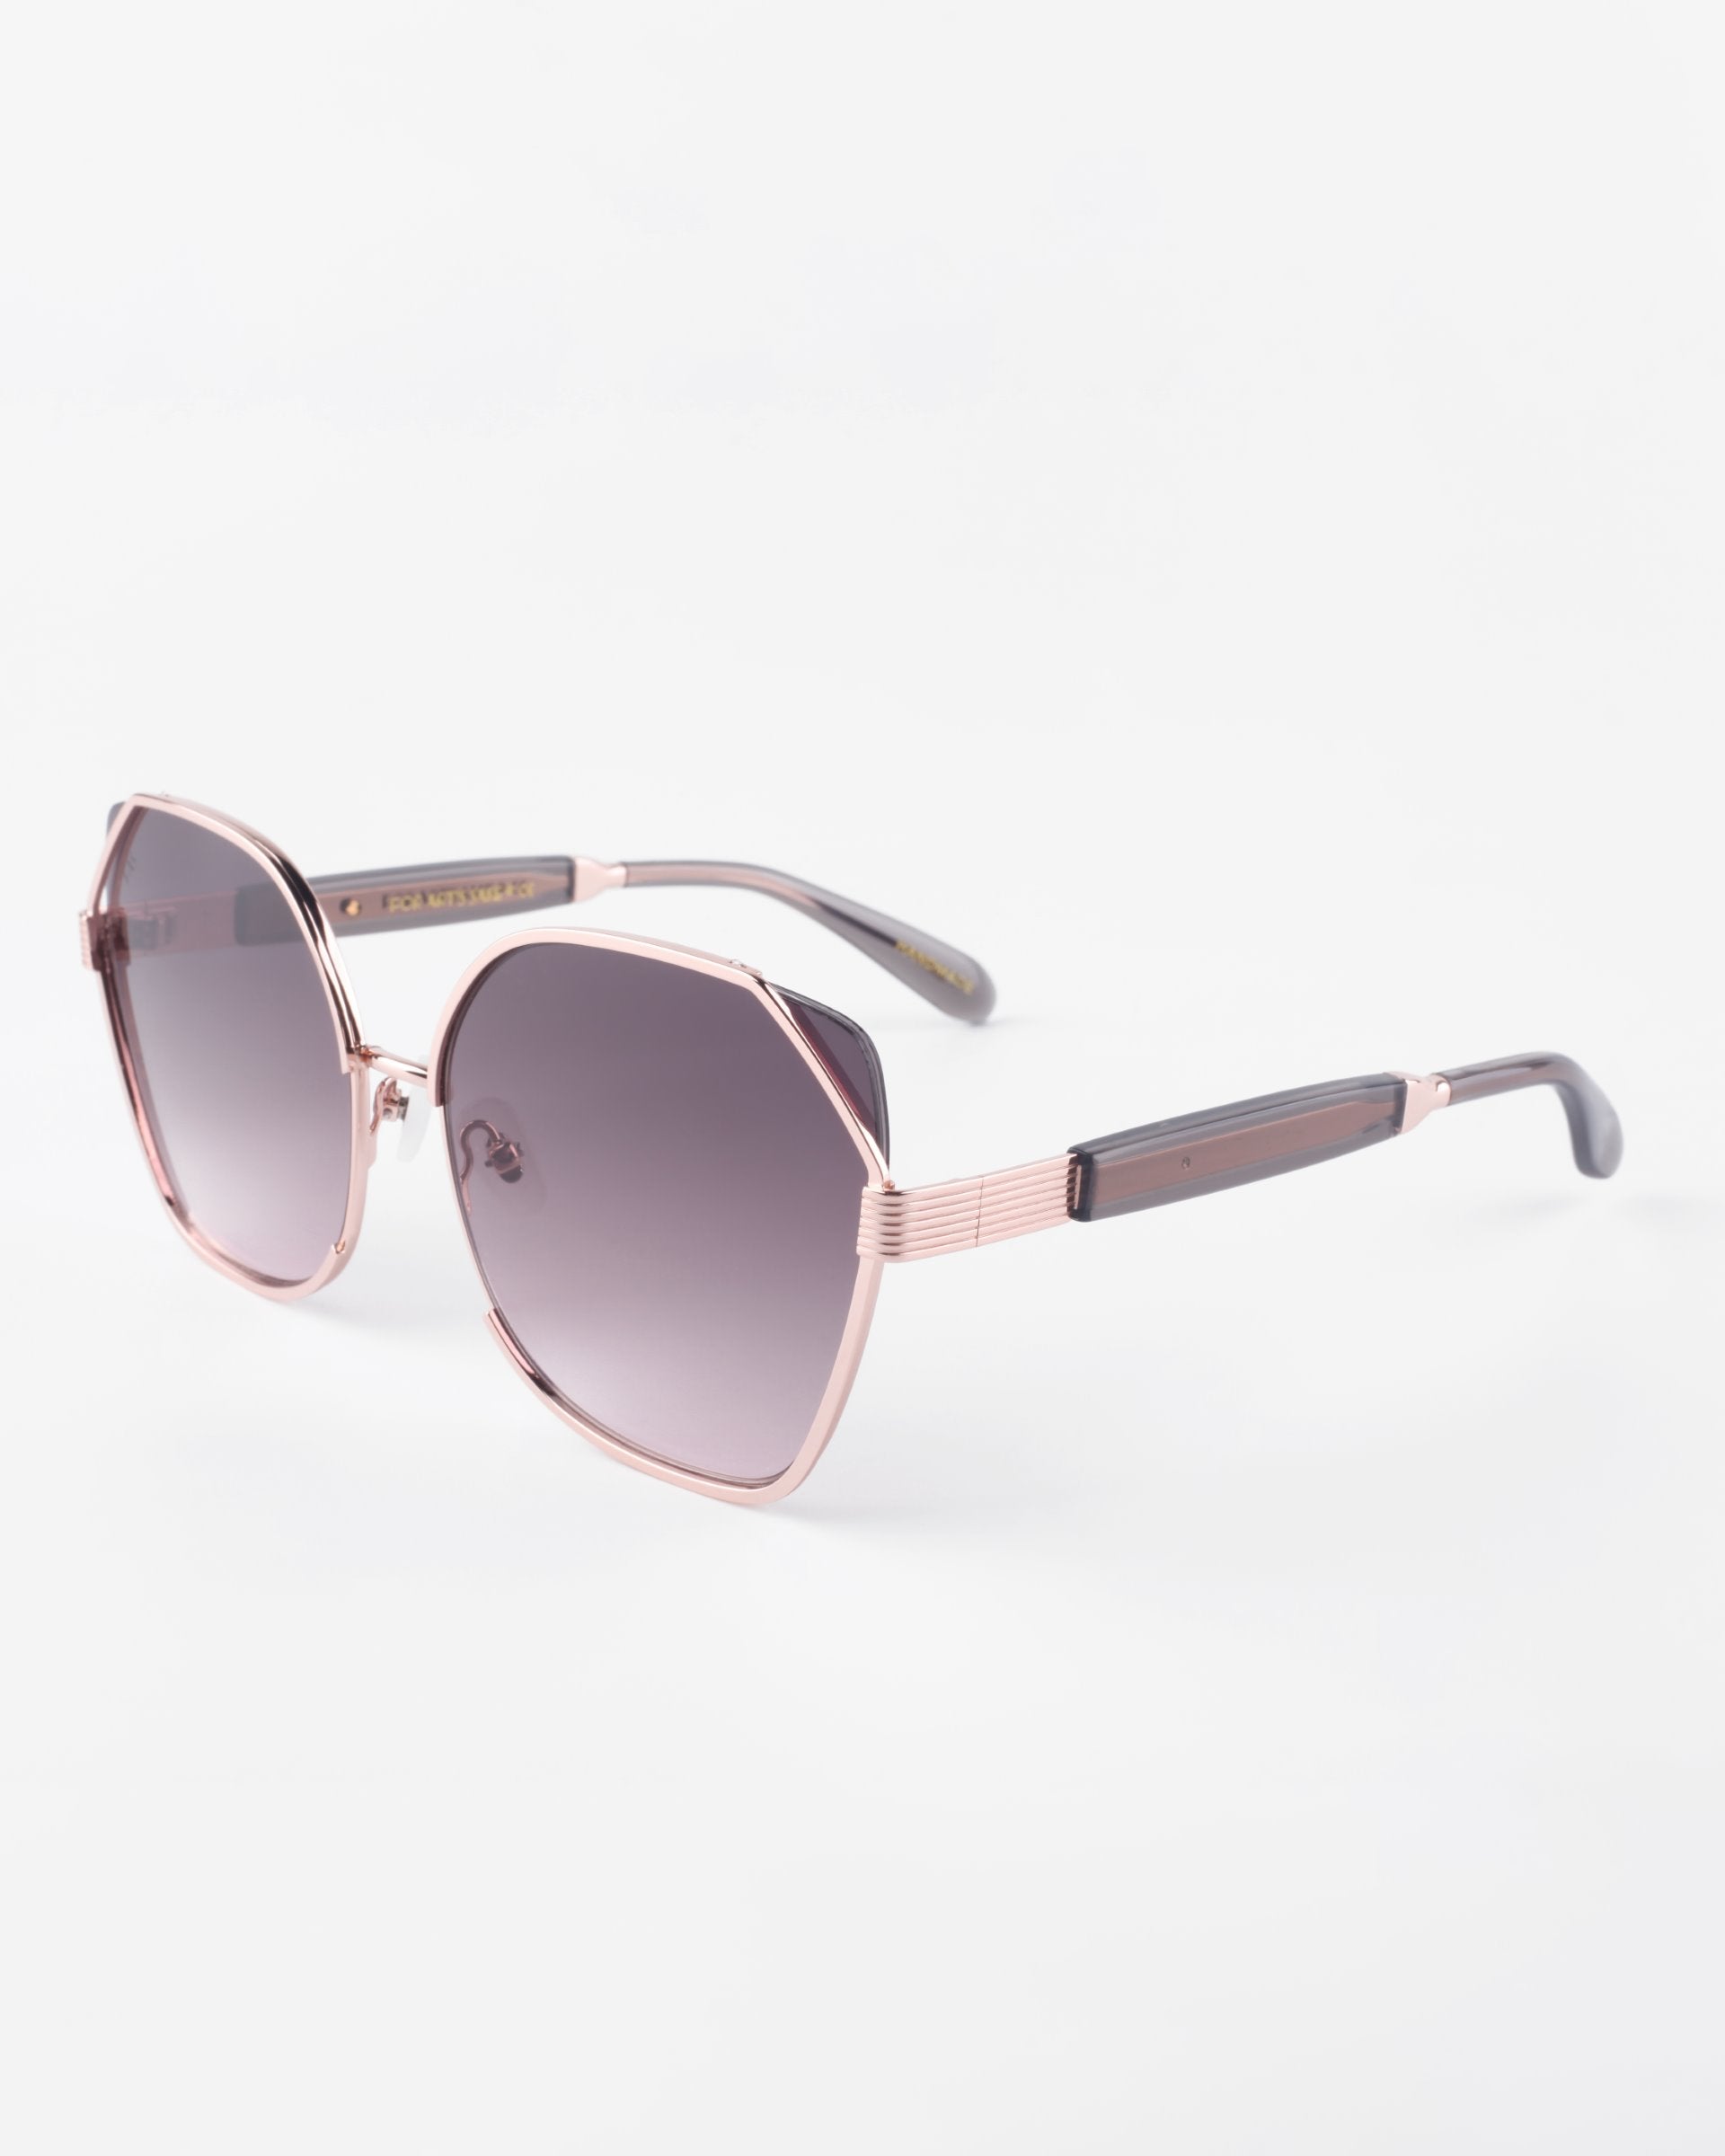 A pair of stylish Montage sunglasses from For Art's Sake® with a rose gold frame and gradient dark lenses, offering 100% UVA & UVB protection. The glasses have geometric, slightly squared lenses and sleek arms with dark tips. Made from gold-plated stainless steel, their design is modern and elegant. The background is plain white.